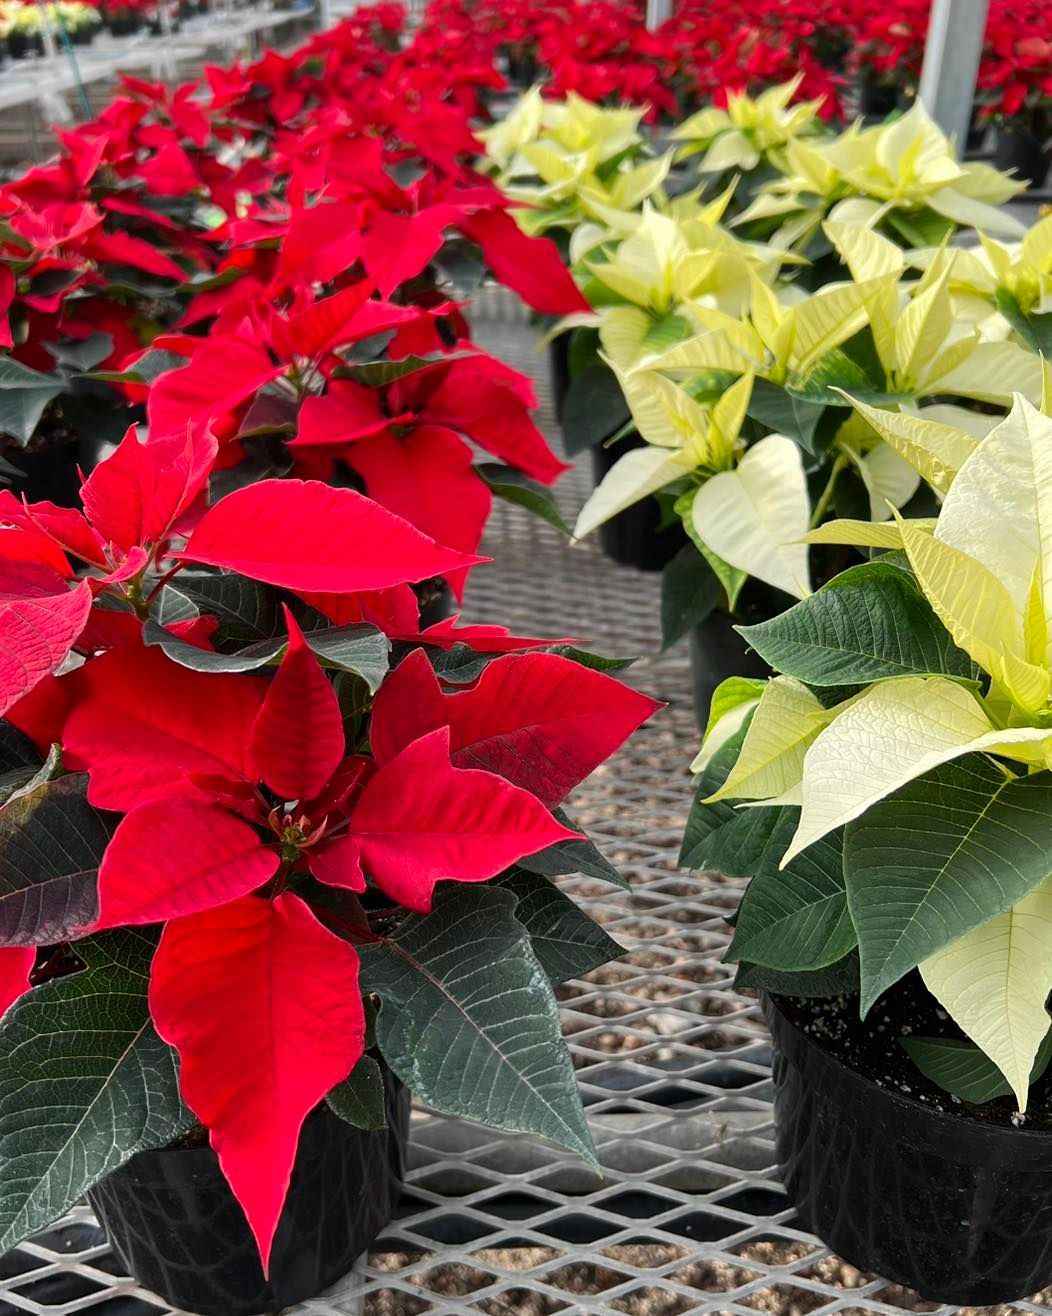 there are many different types of poinsettia flowers in pots .